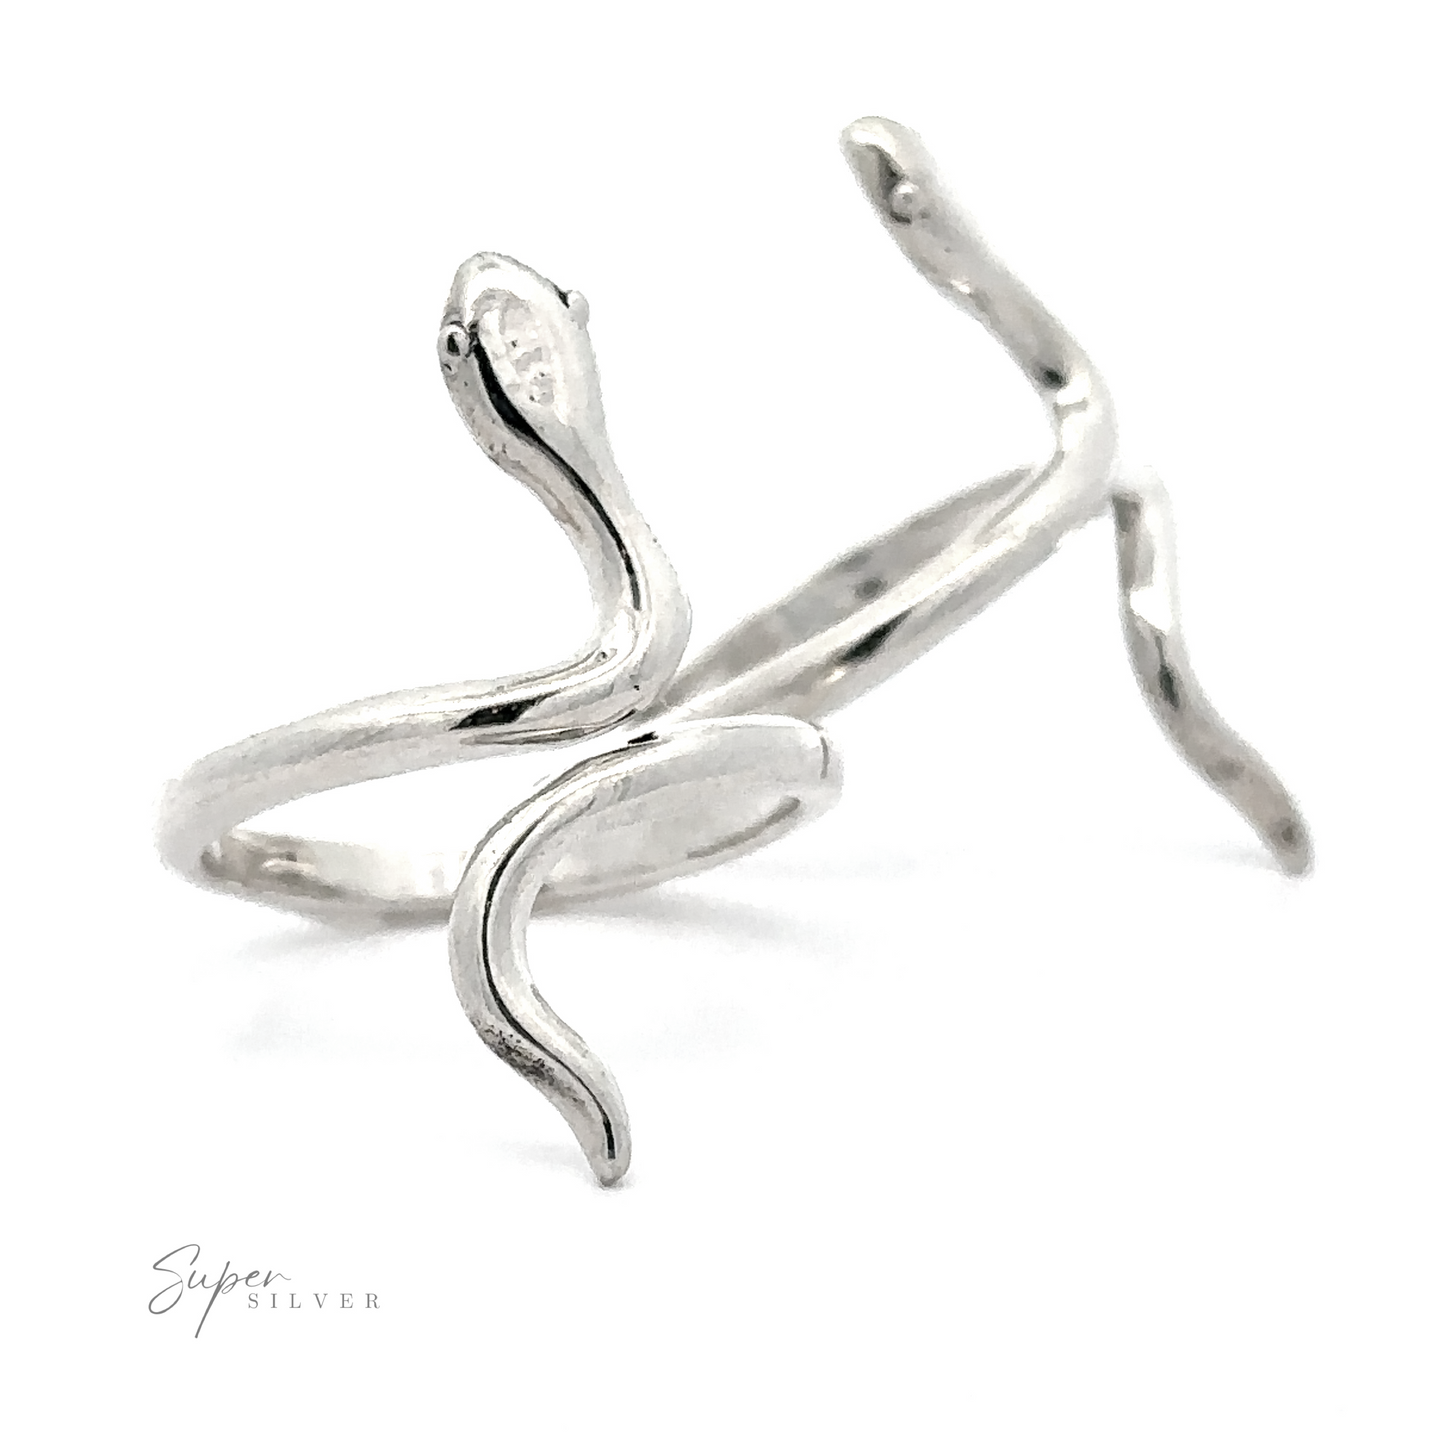 Wrap-Around Simple Snake Ring with a polished finish, featuring a dual-headed serpent design, isolated on a white background.